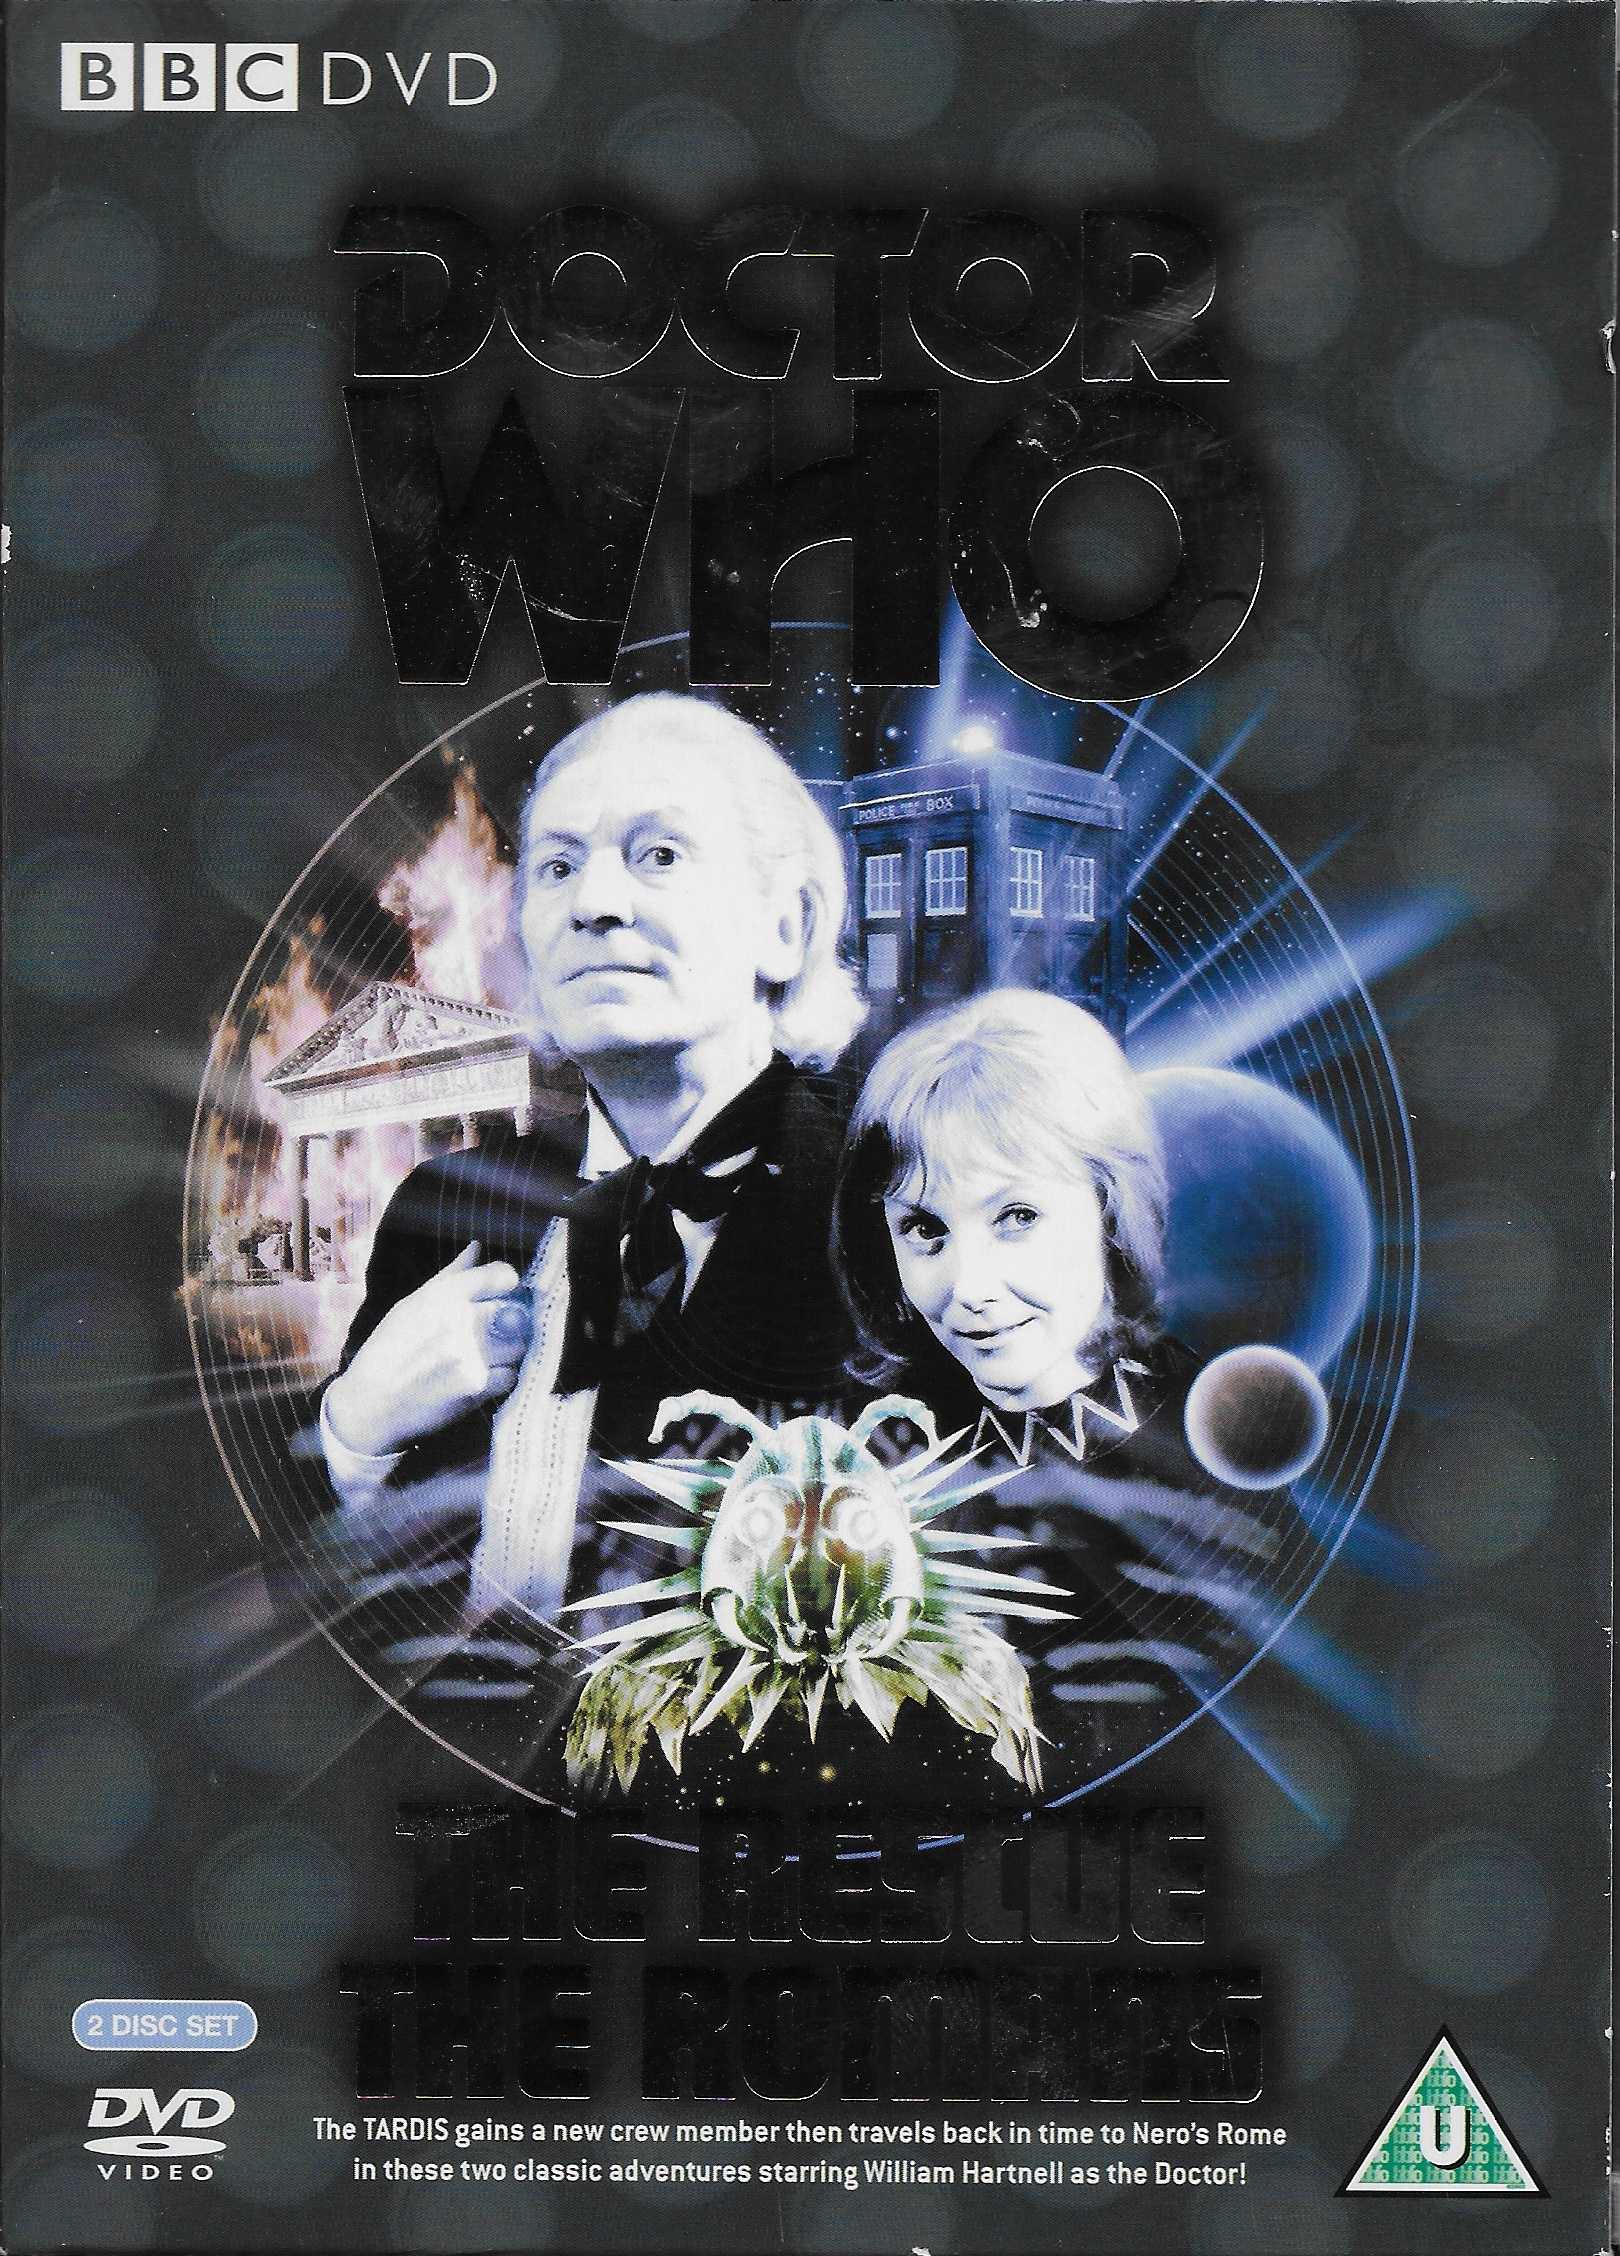 Picture of BBCDVD 2698 Doctor Who - The rescue / The Romans by artist Terry Nation / Dennis Spooner from the BBC records and Tapes library